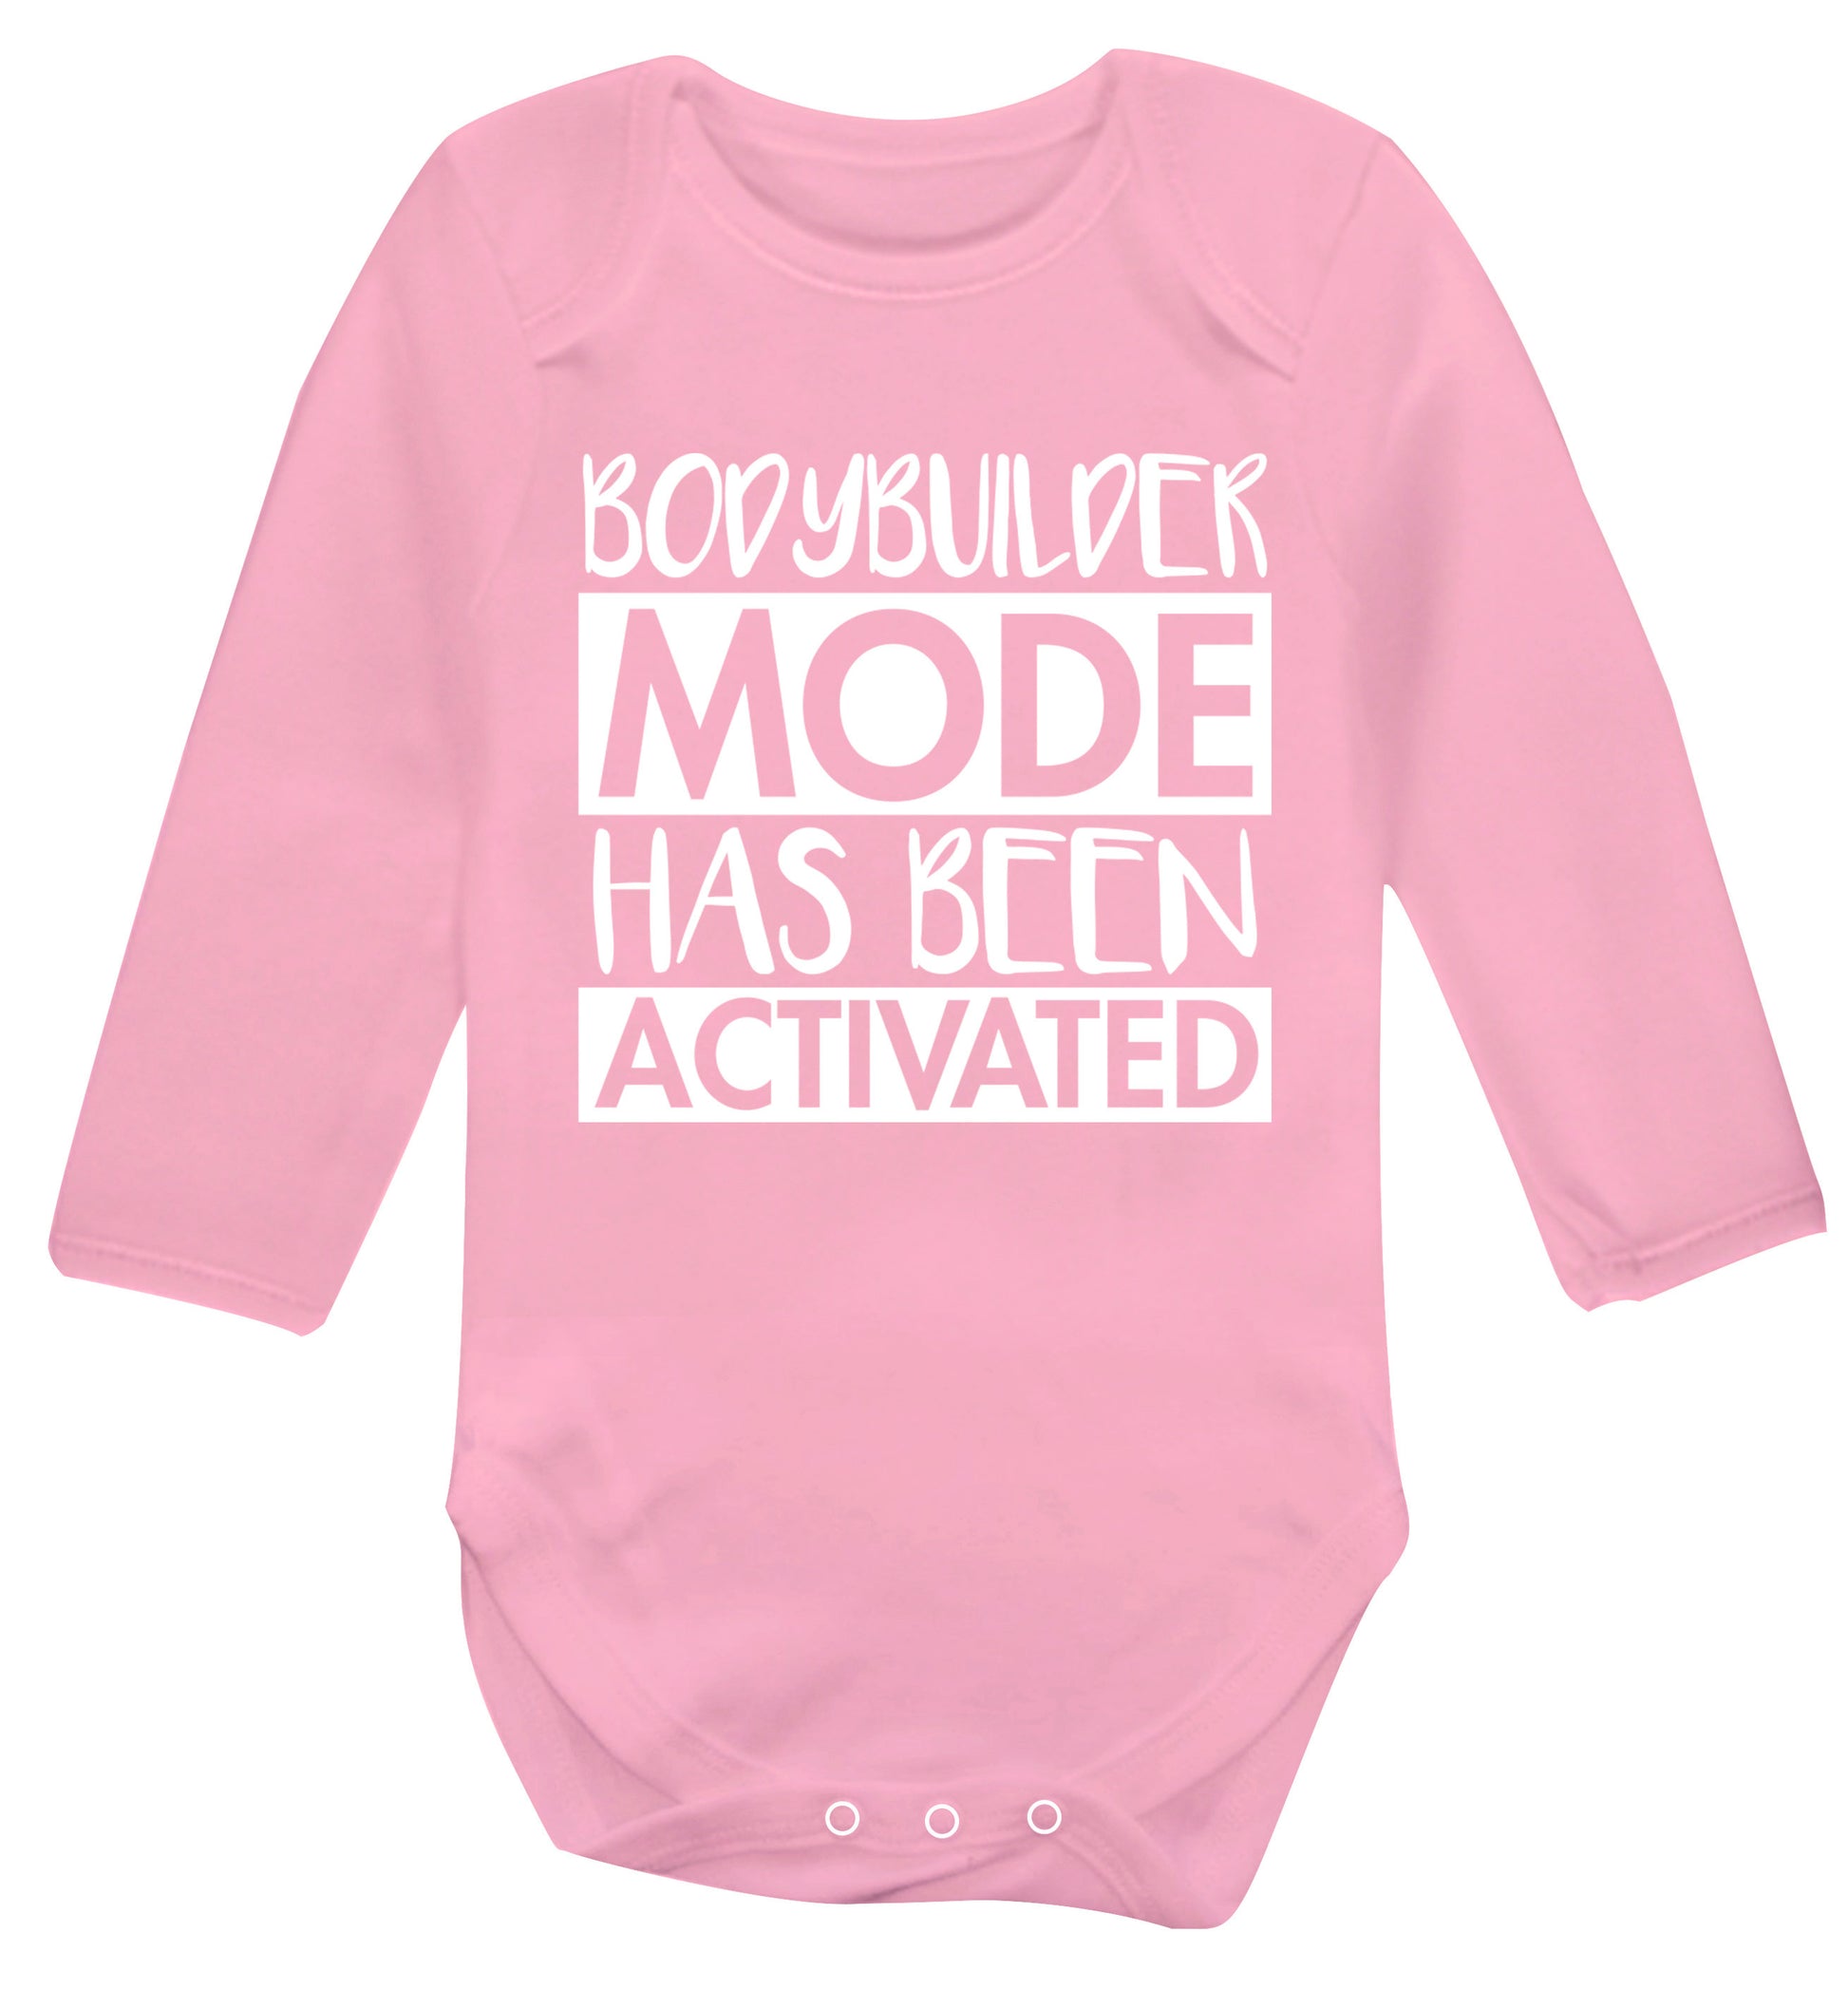 Bodybuilder mode activated Baby Vest long sleeved pale pink 6-12 months